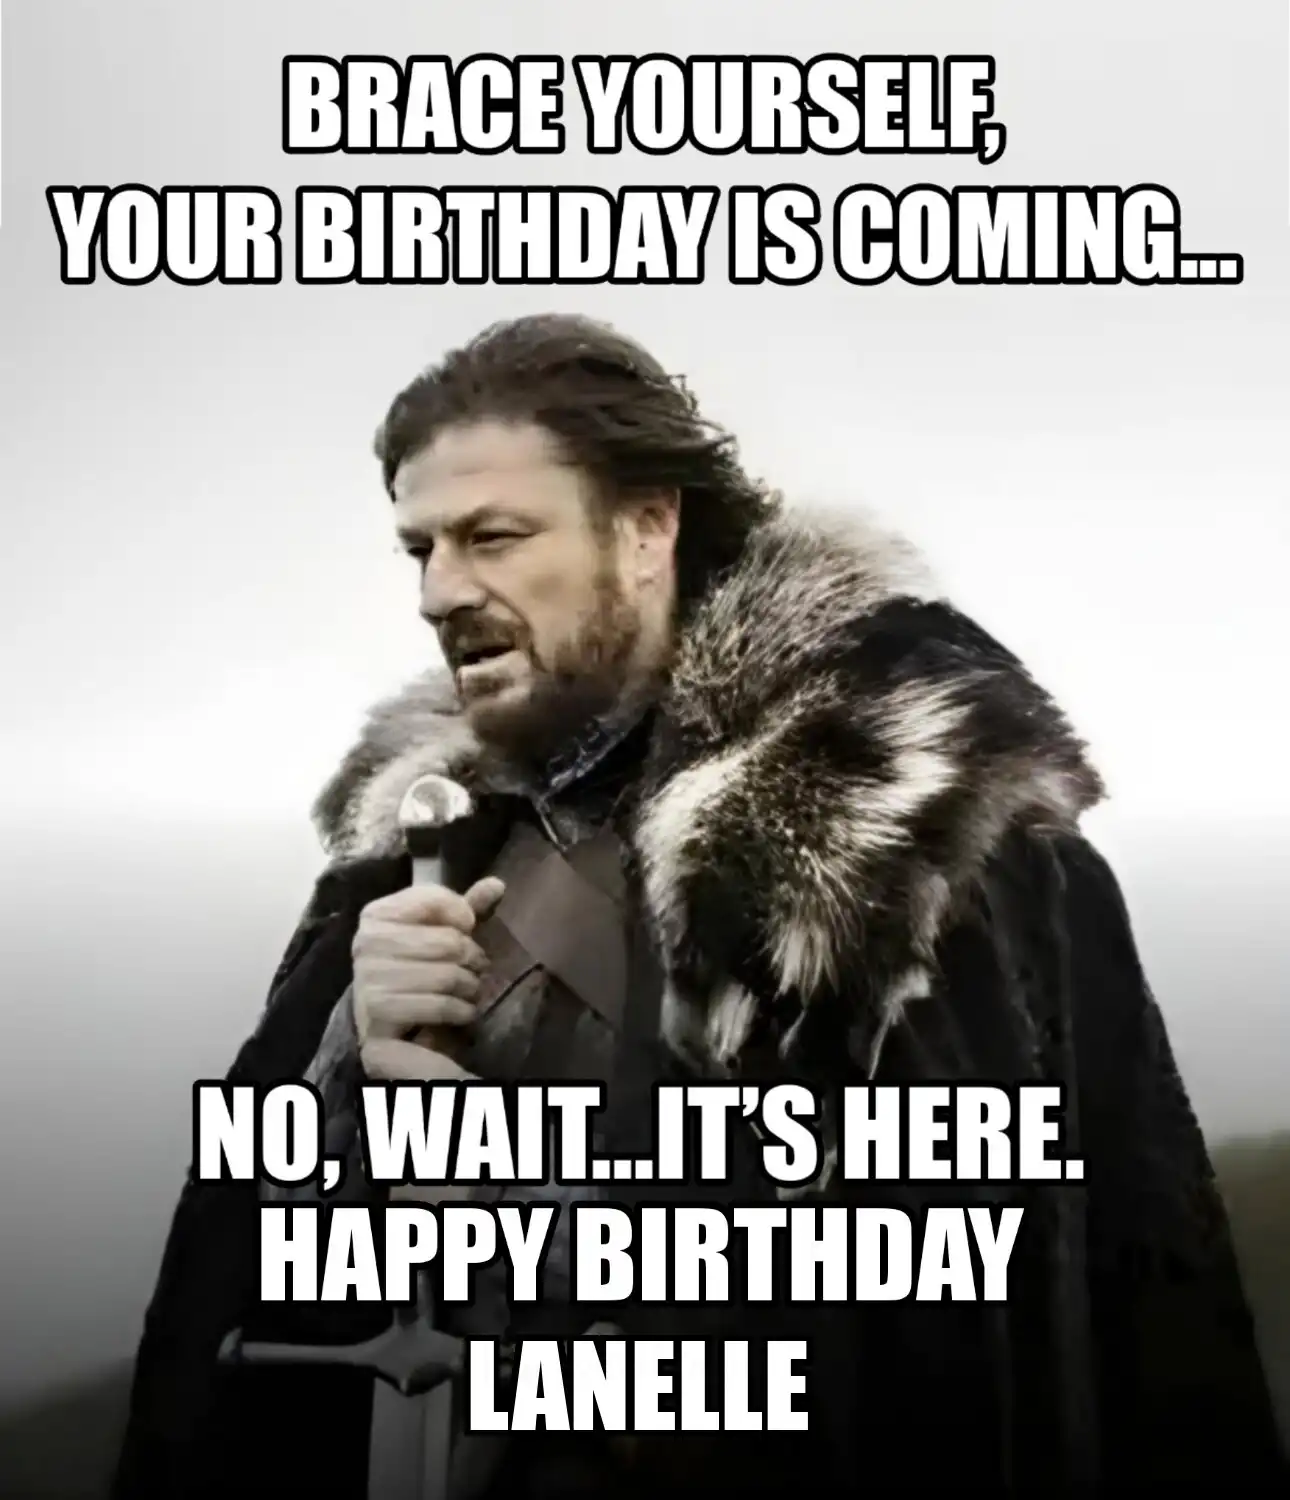 Happy Birthday Lanelle Brace Yourself Your Birthday Is Coming Meme